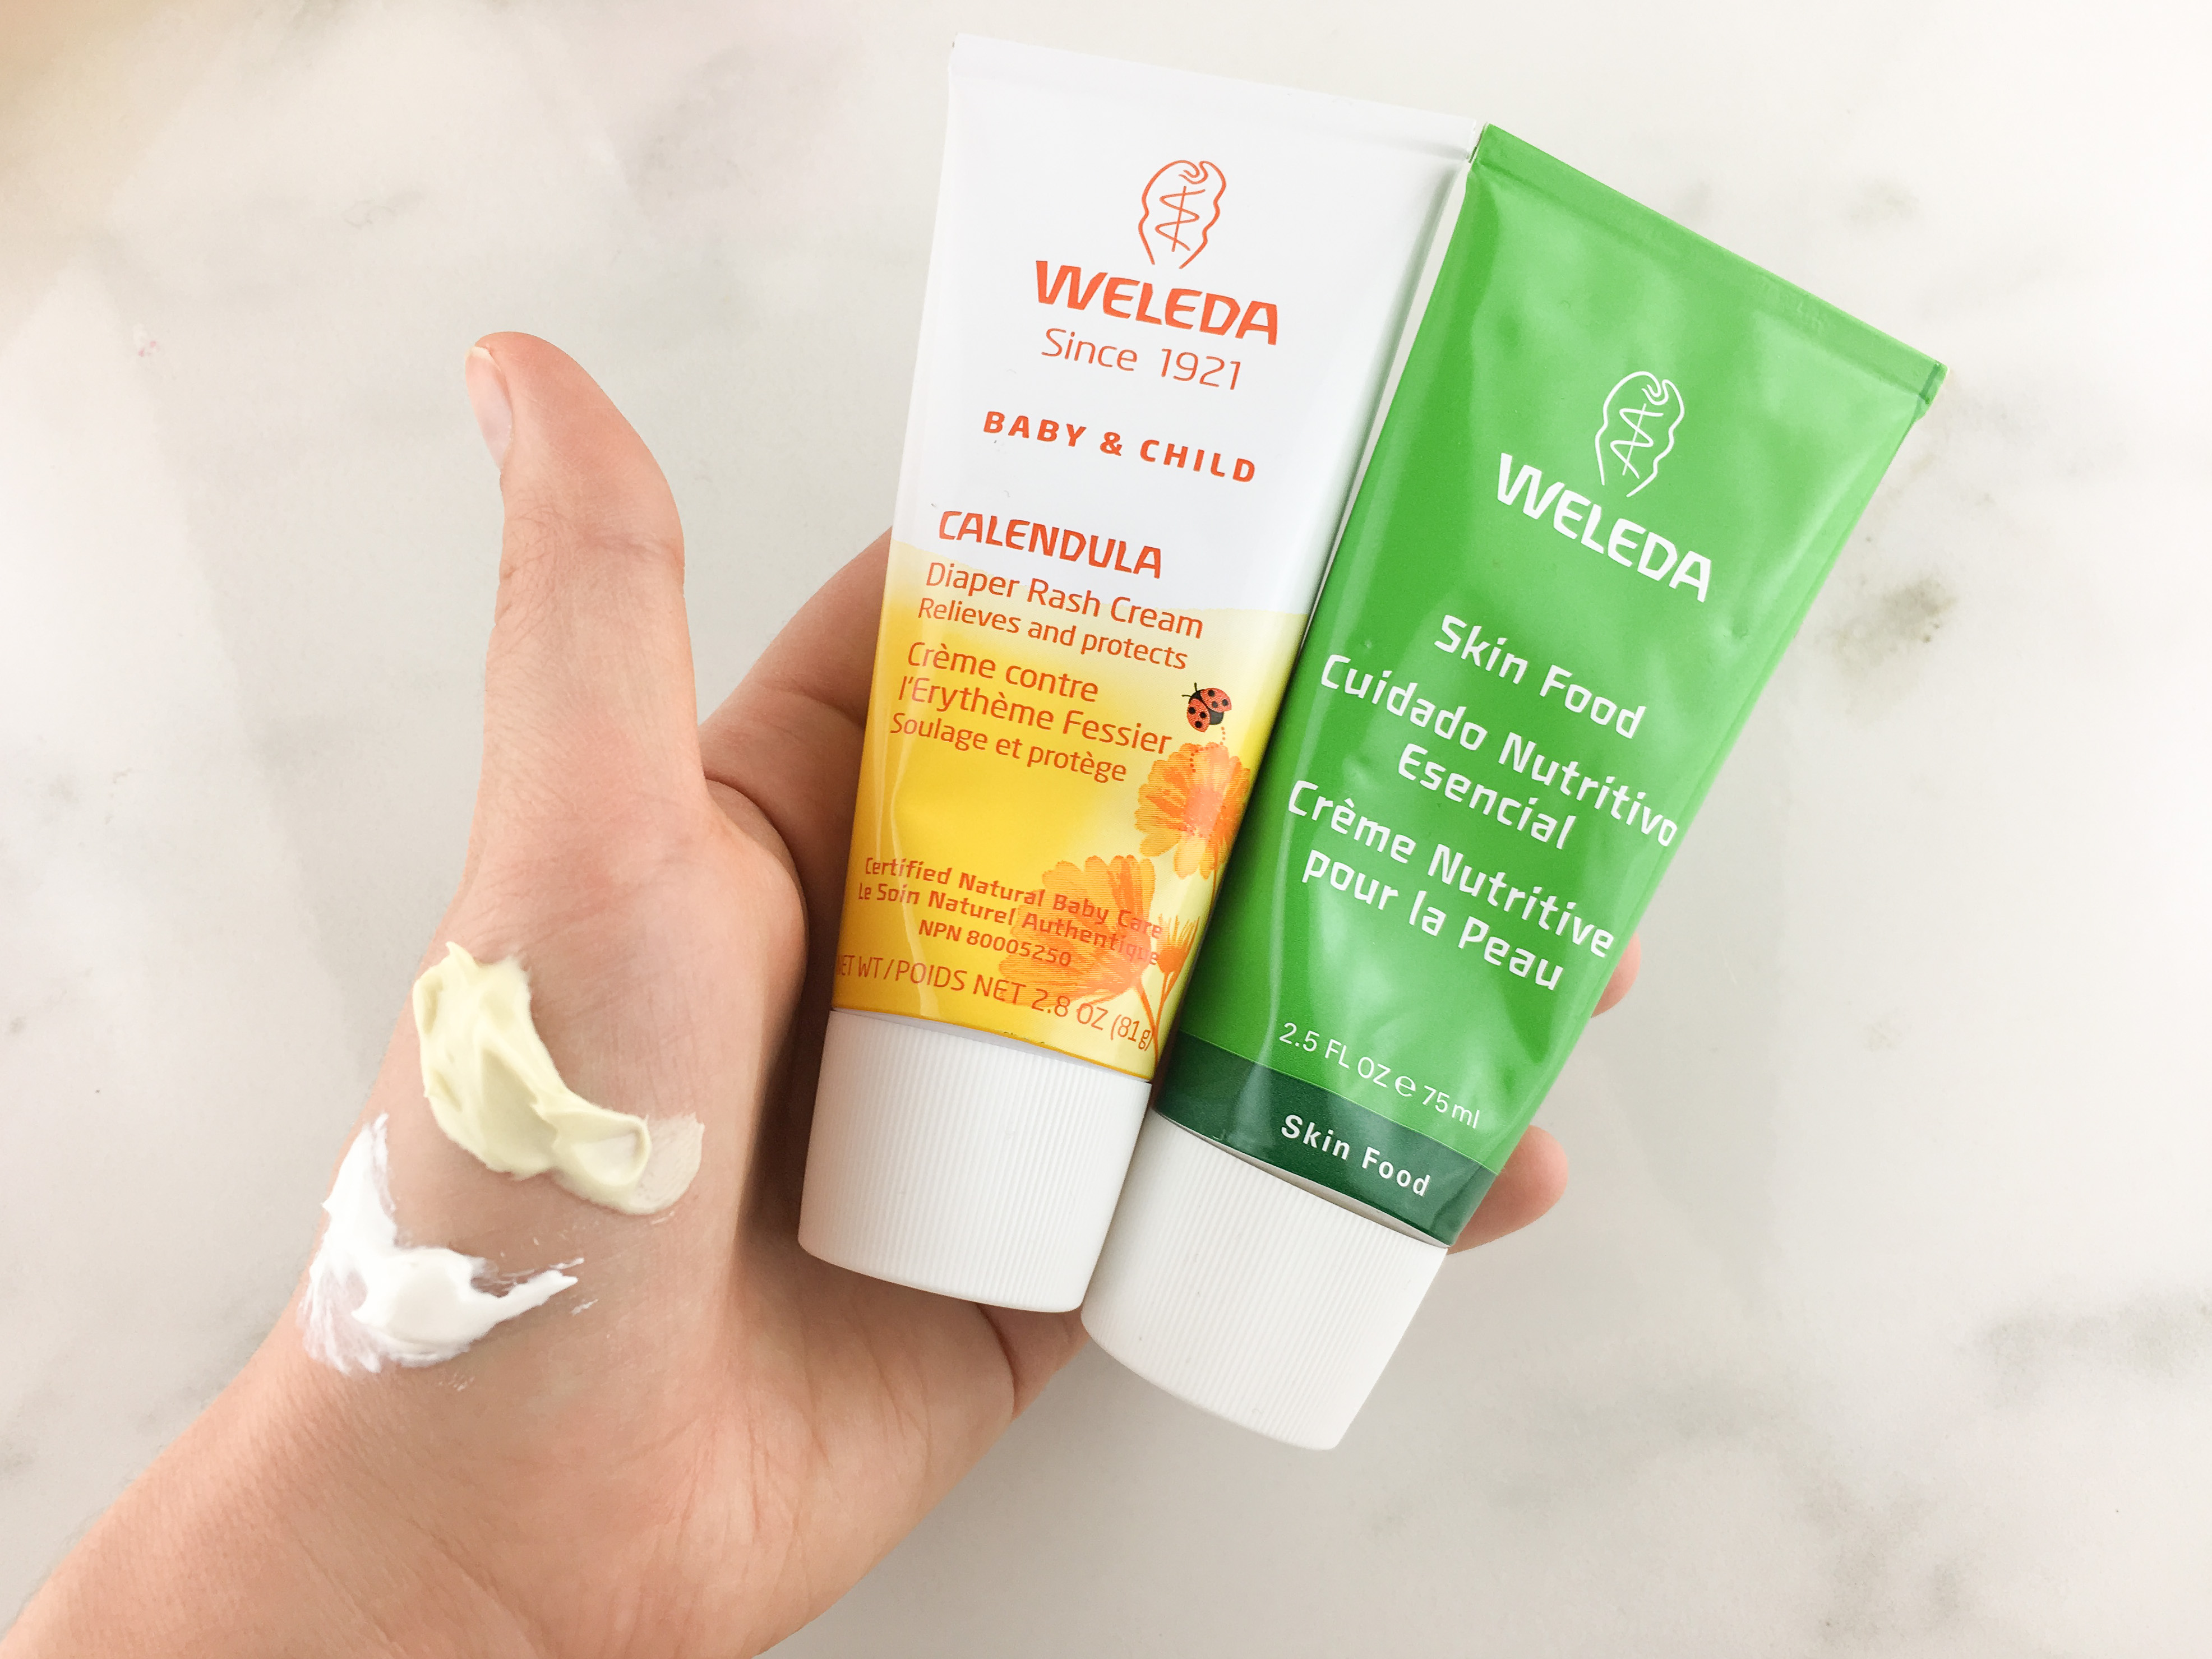 Have dry hands? Want to take care of a blemish a super ninja way?! Or maybe you love rose scented deodorant? Just sit tight and I’m going to give you some solutions baby! But first, let’s talk a little about Weleda.